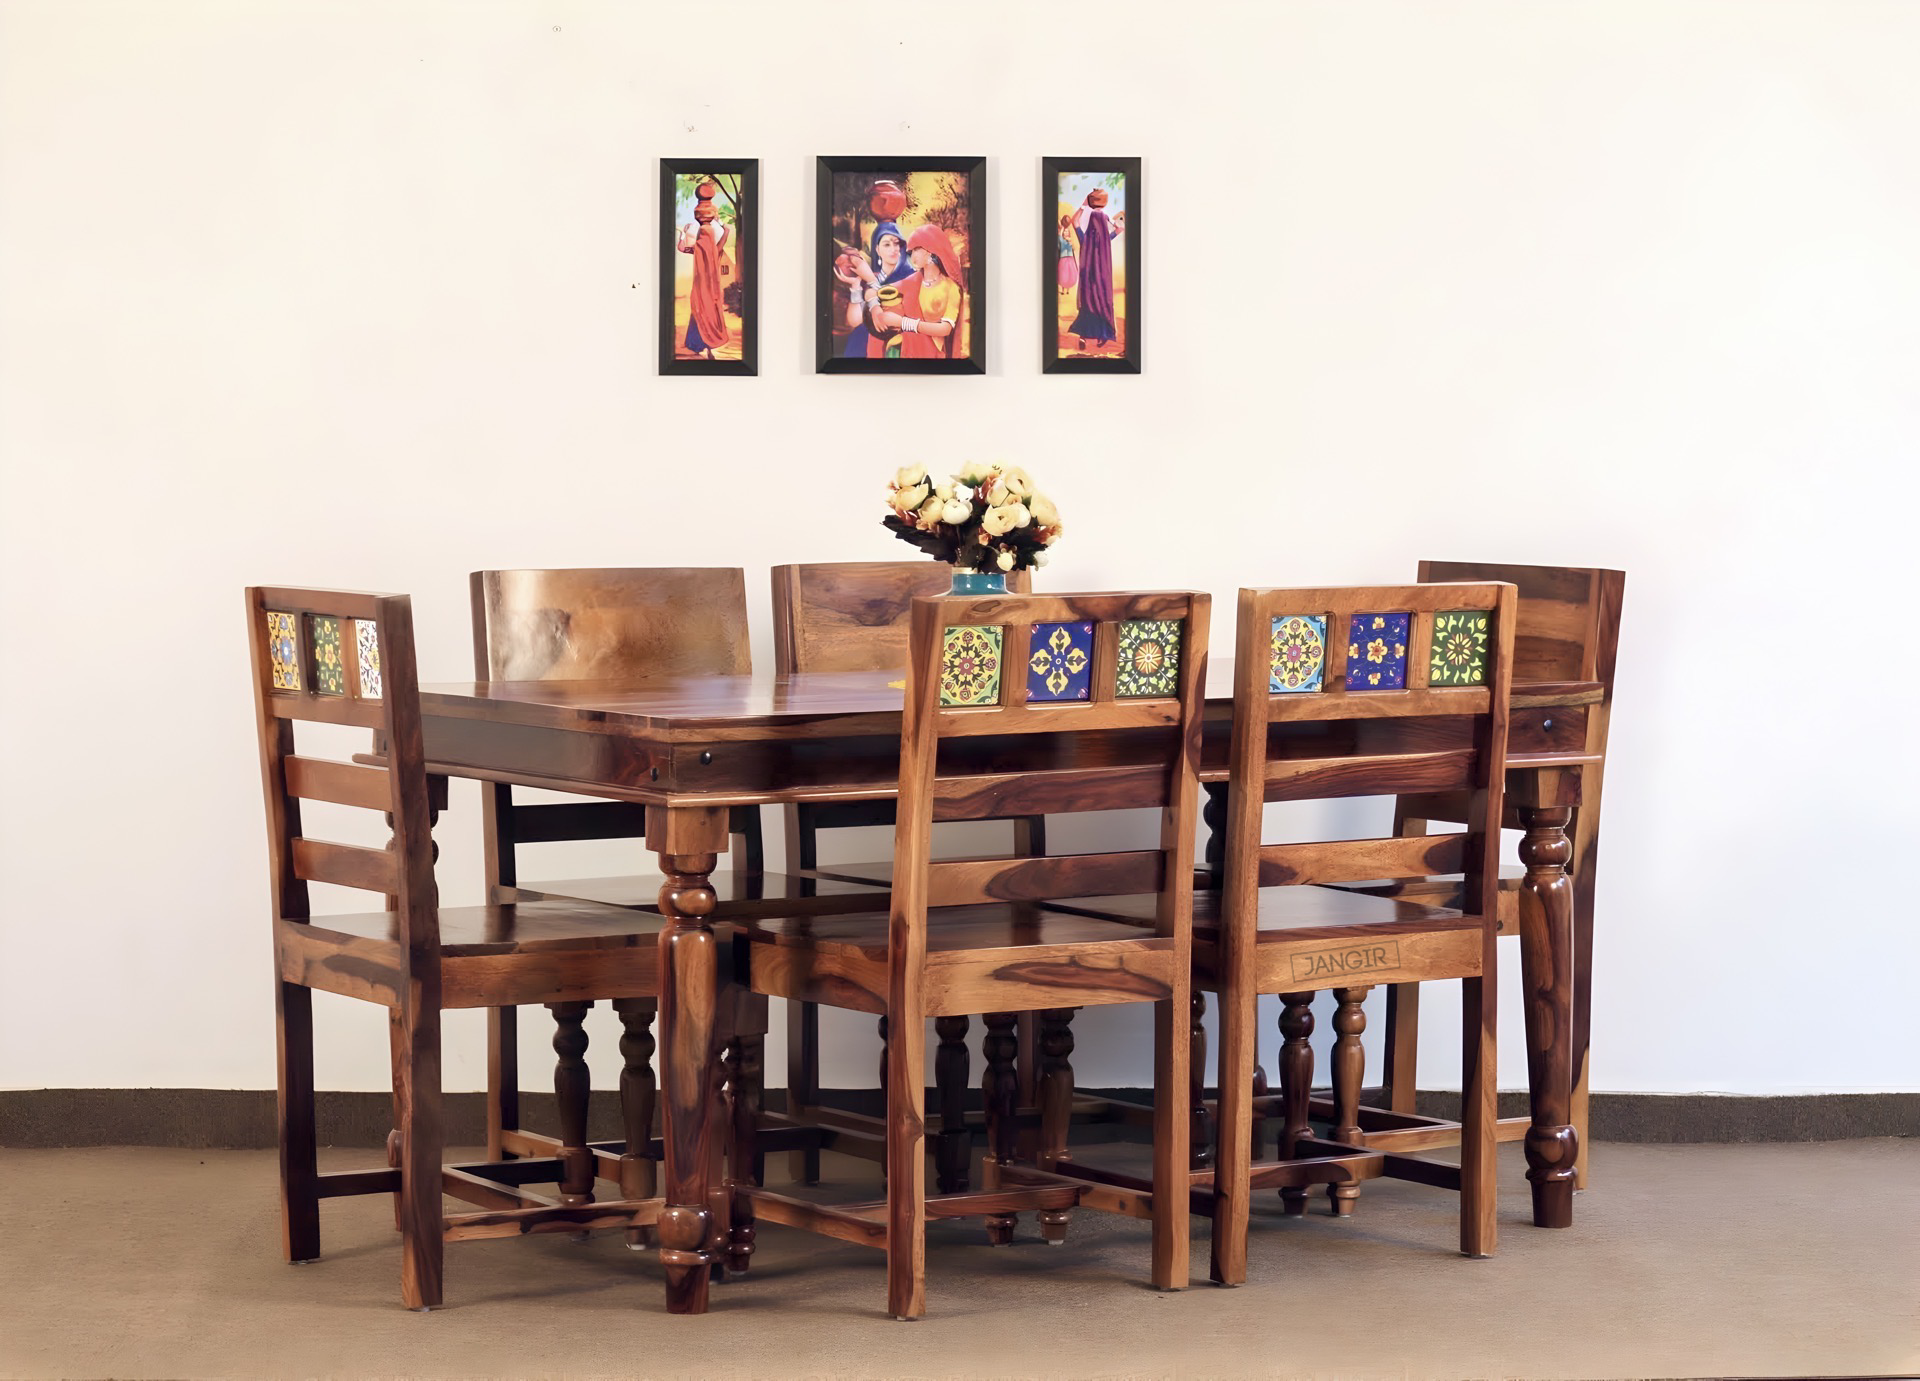 Discover the perfect Rajasthani Style tiles dining table set to complement your dining room, made with sheesham wood. Buy online or in-store for the perfect combination of beauty and durability!